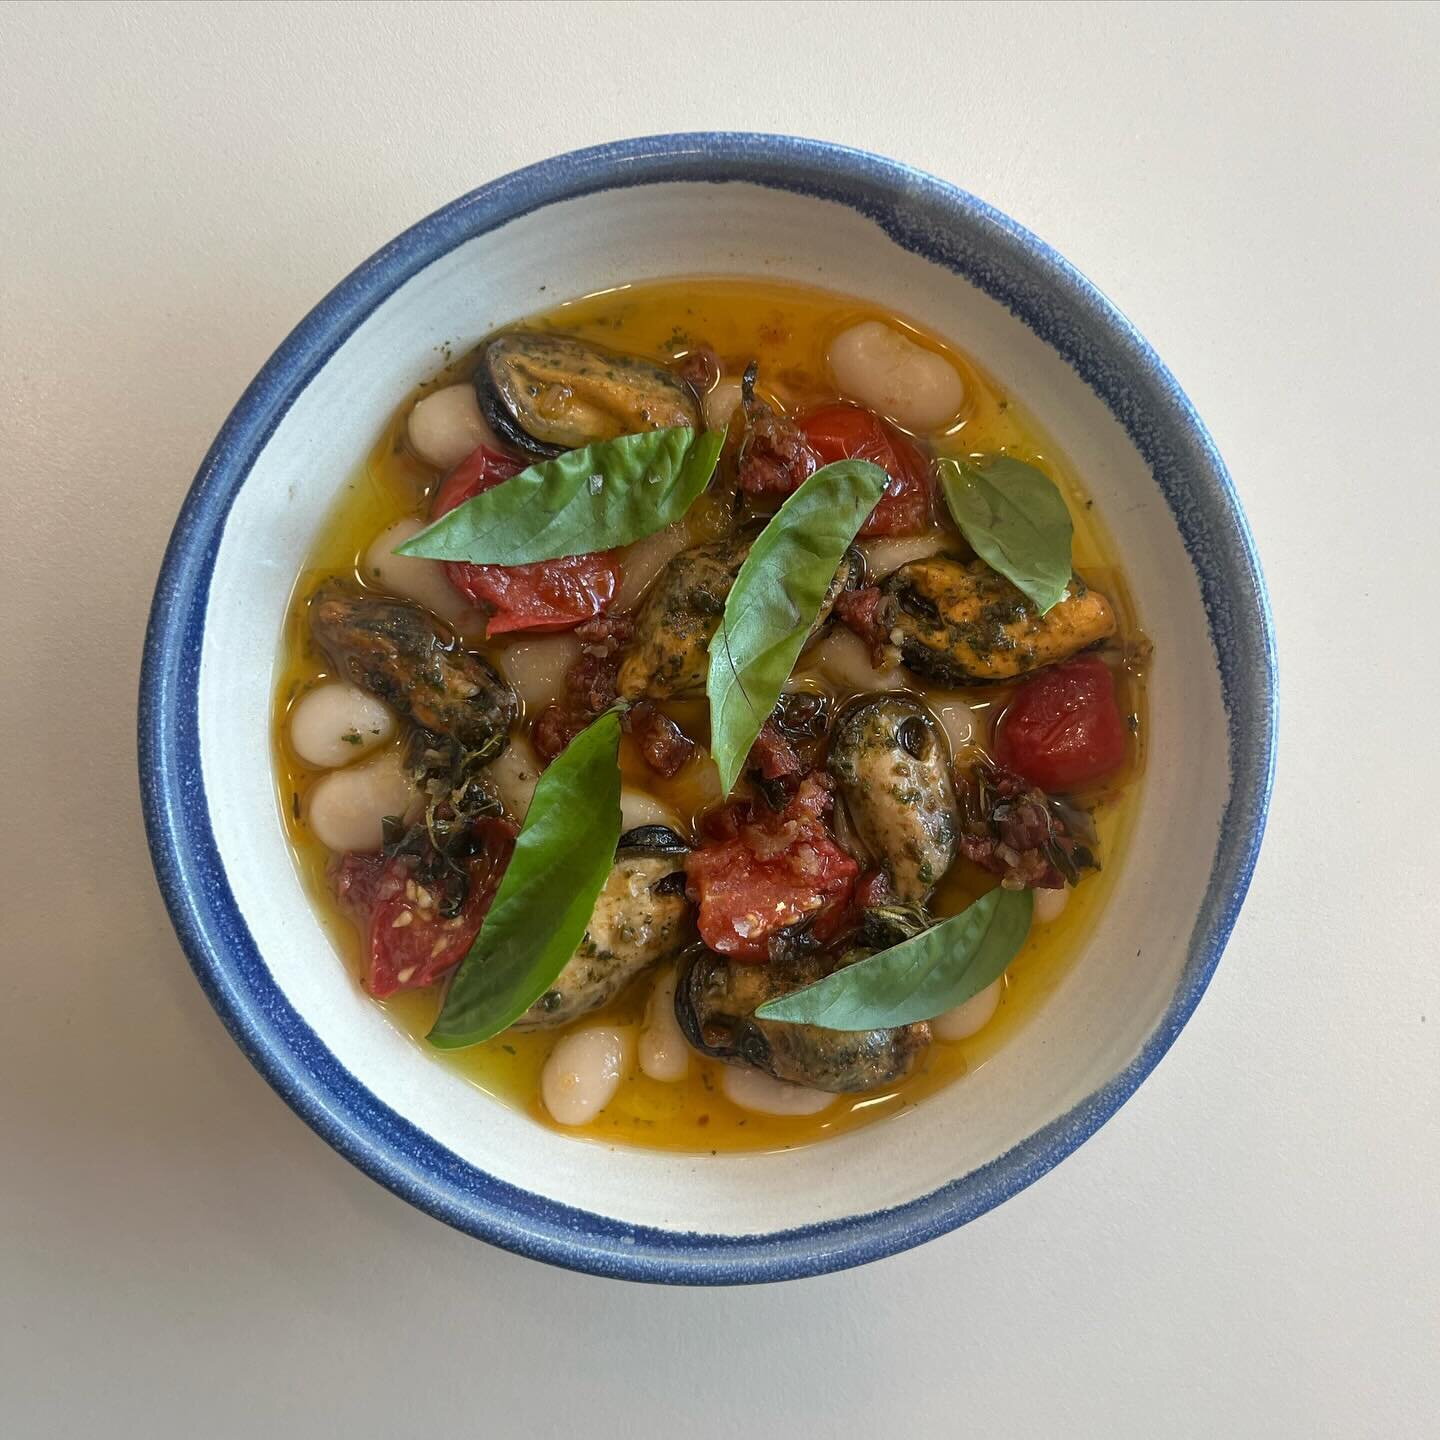 New on the menu this week! Mussels with beans , soutzouki and tomato. Mussels are steamed in dashi and sit in a cold escabeche style broth with plump butter beans. We finish this off with a punchy and crunchy salsa made from soutzouki , a spicy dry s